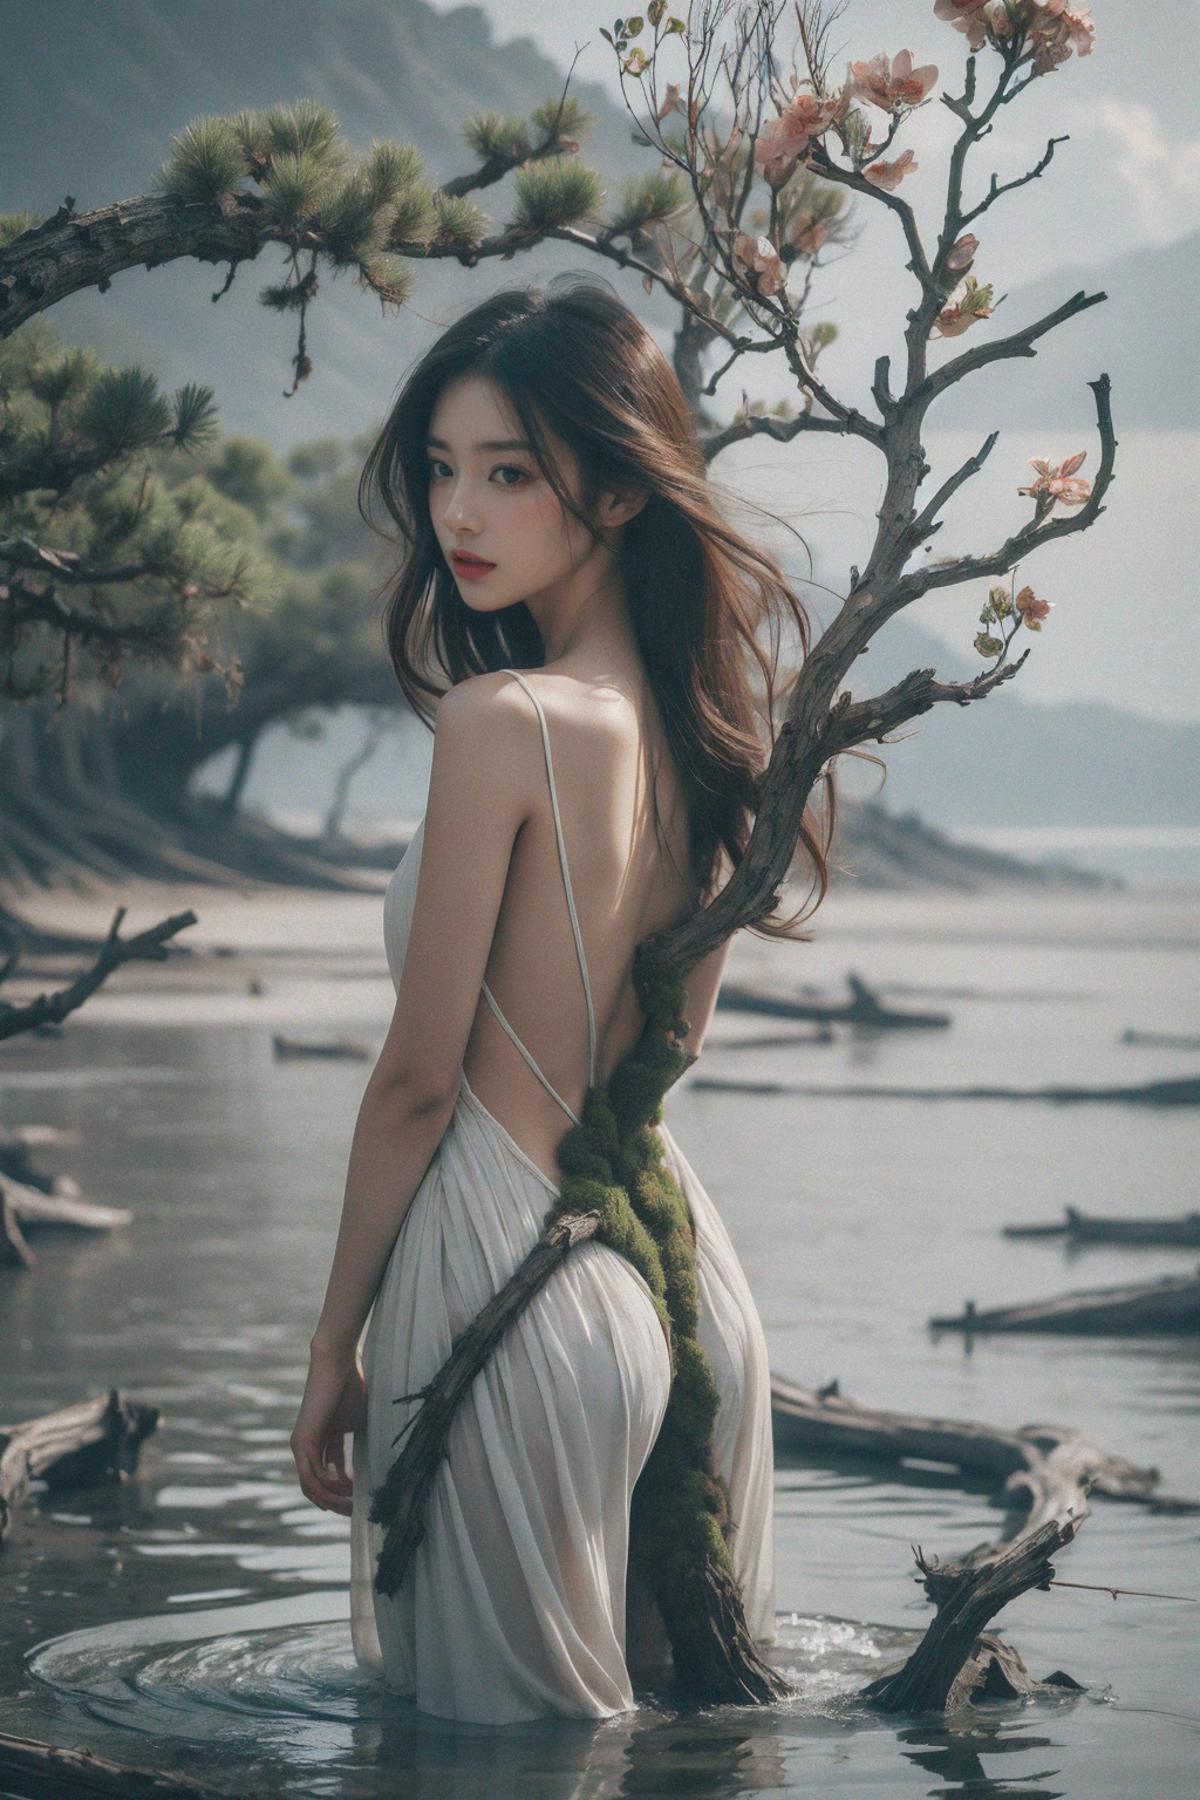 A woman in a white dress with a tree branch on her back, standing by the water.